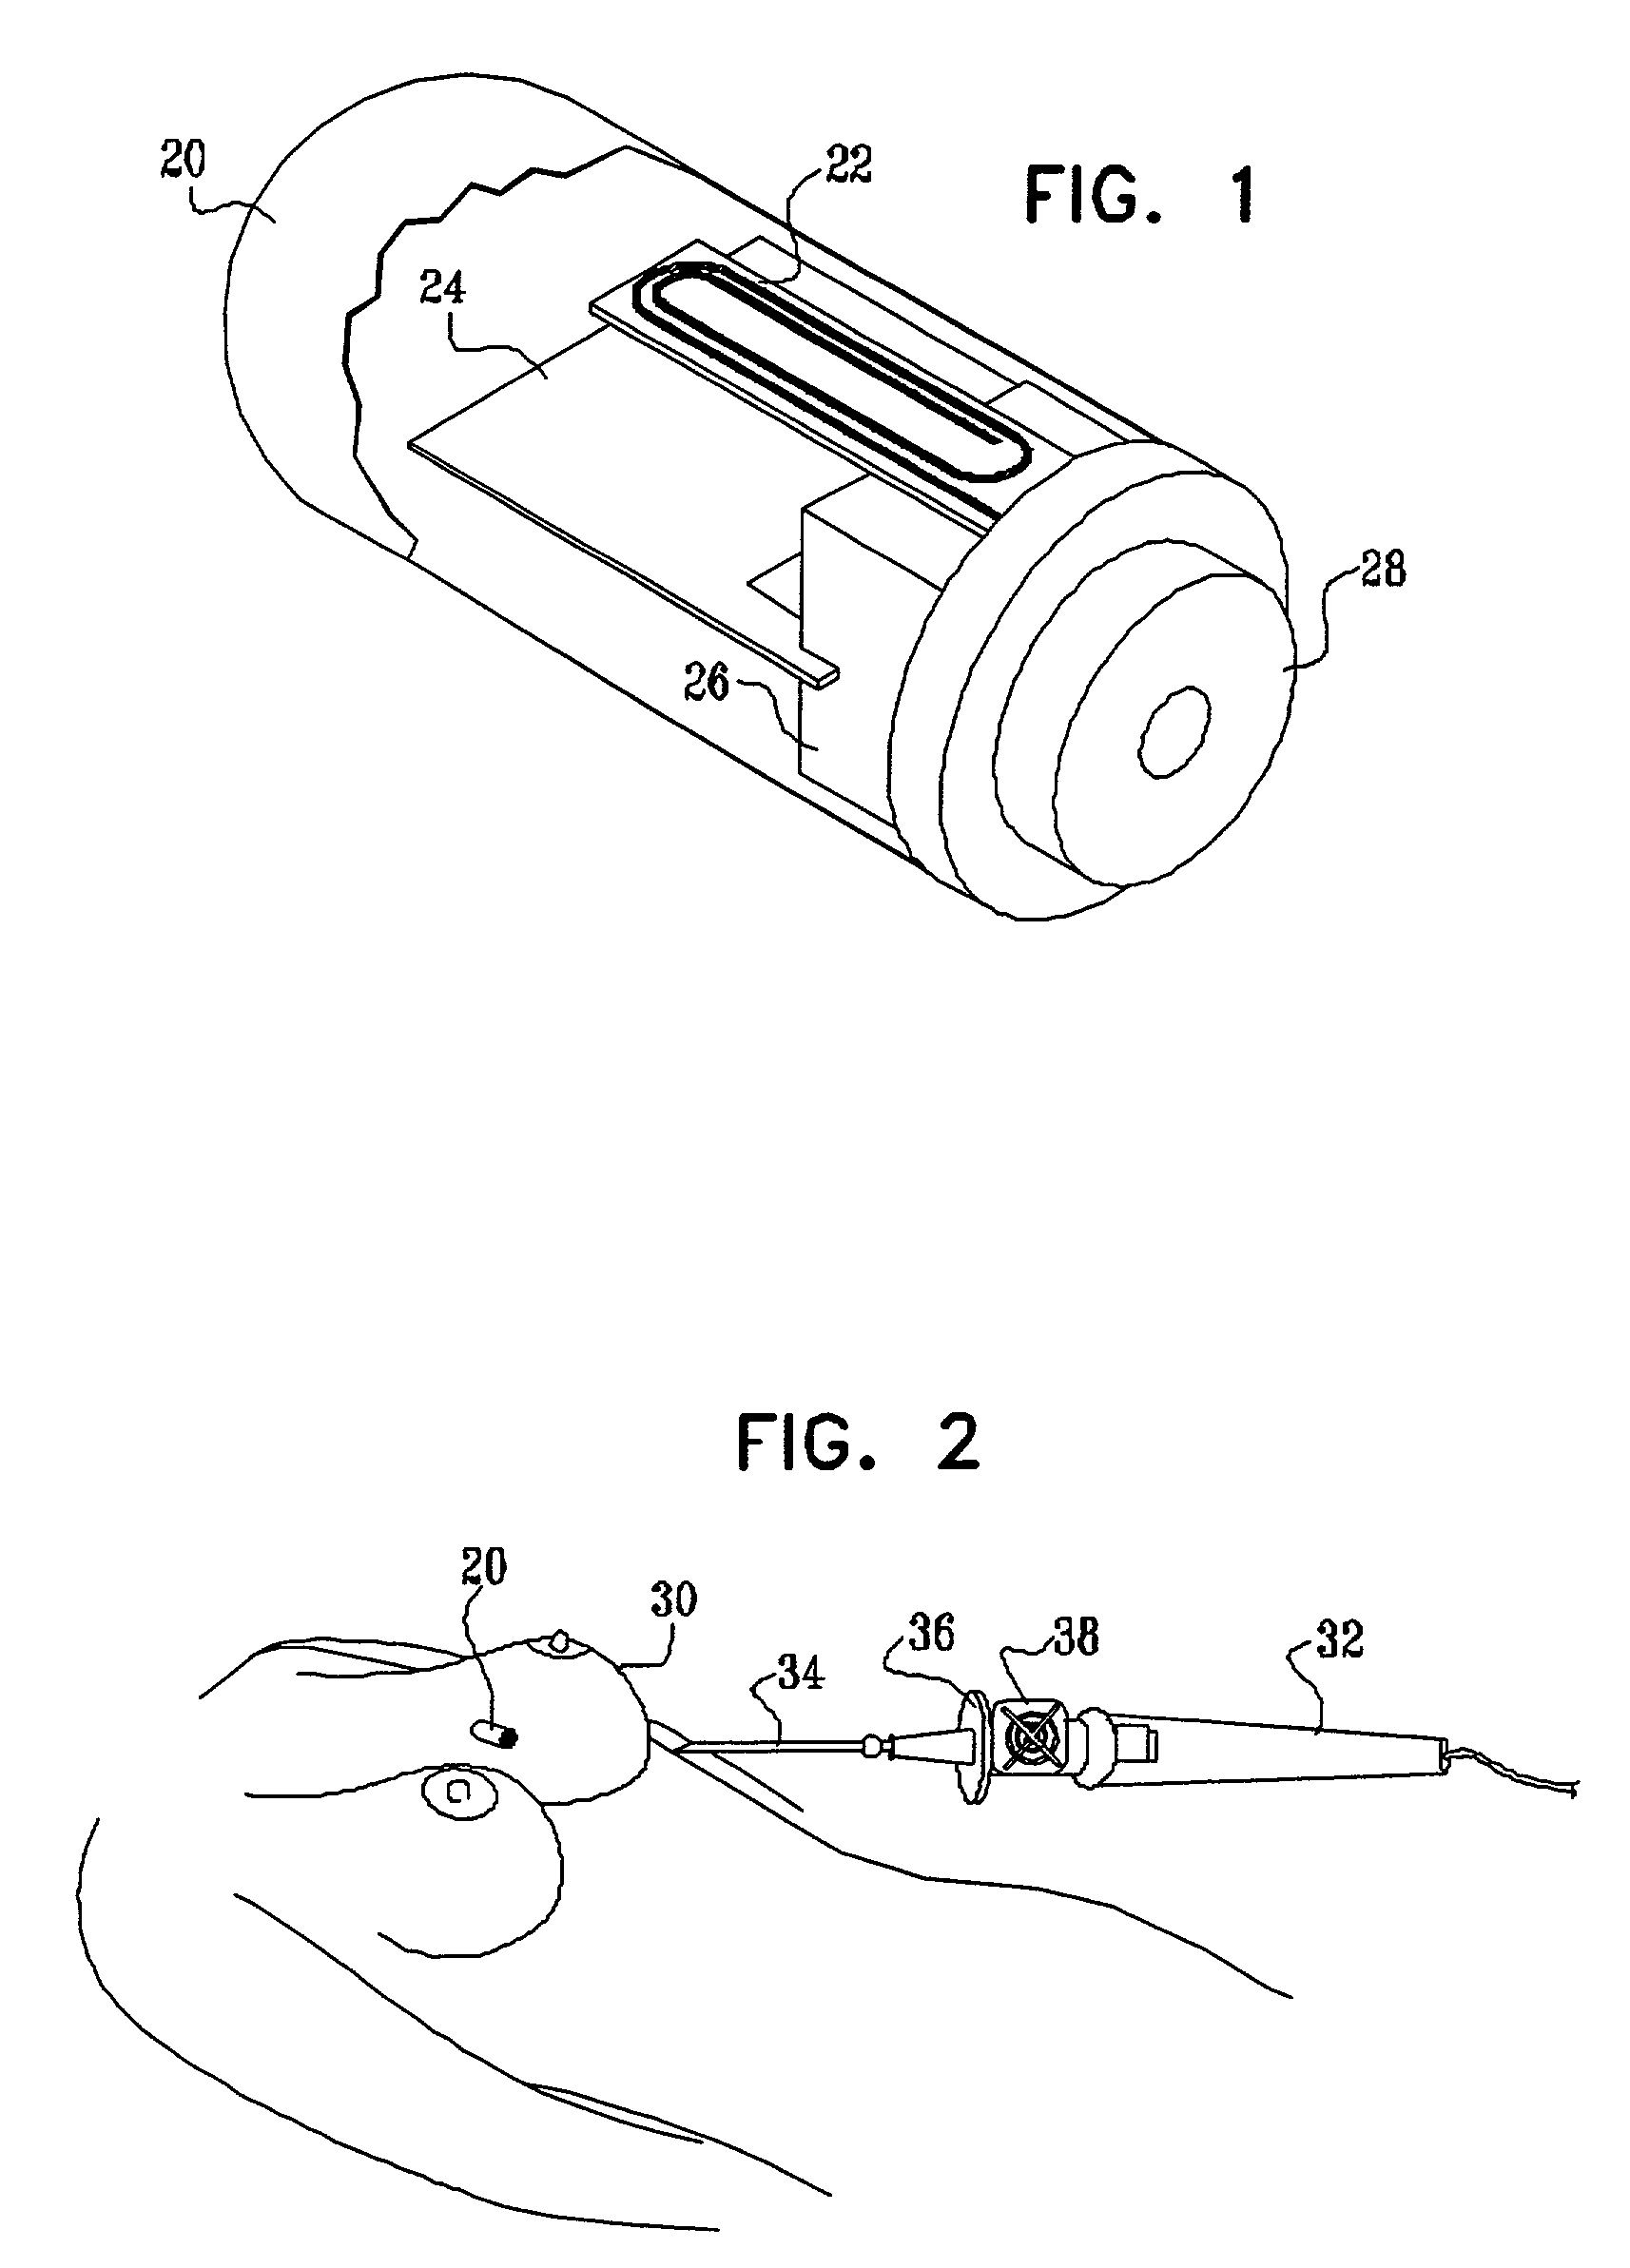 Position sensing system with integral location pad and position display